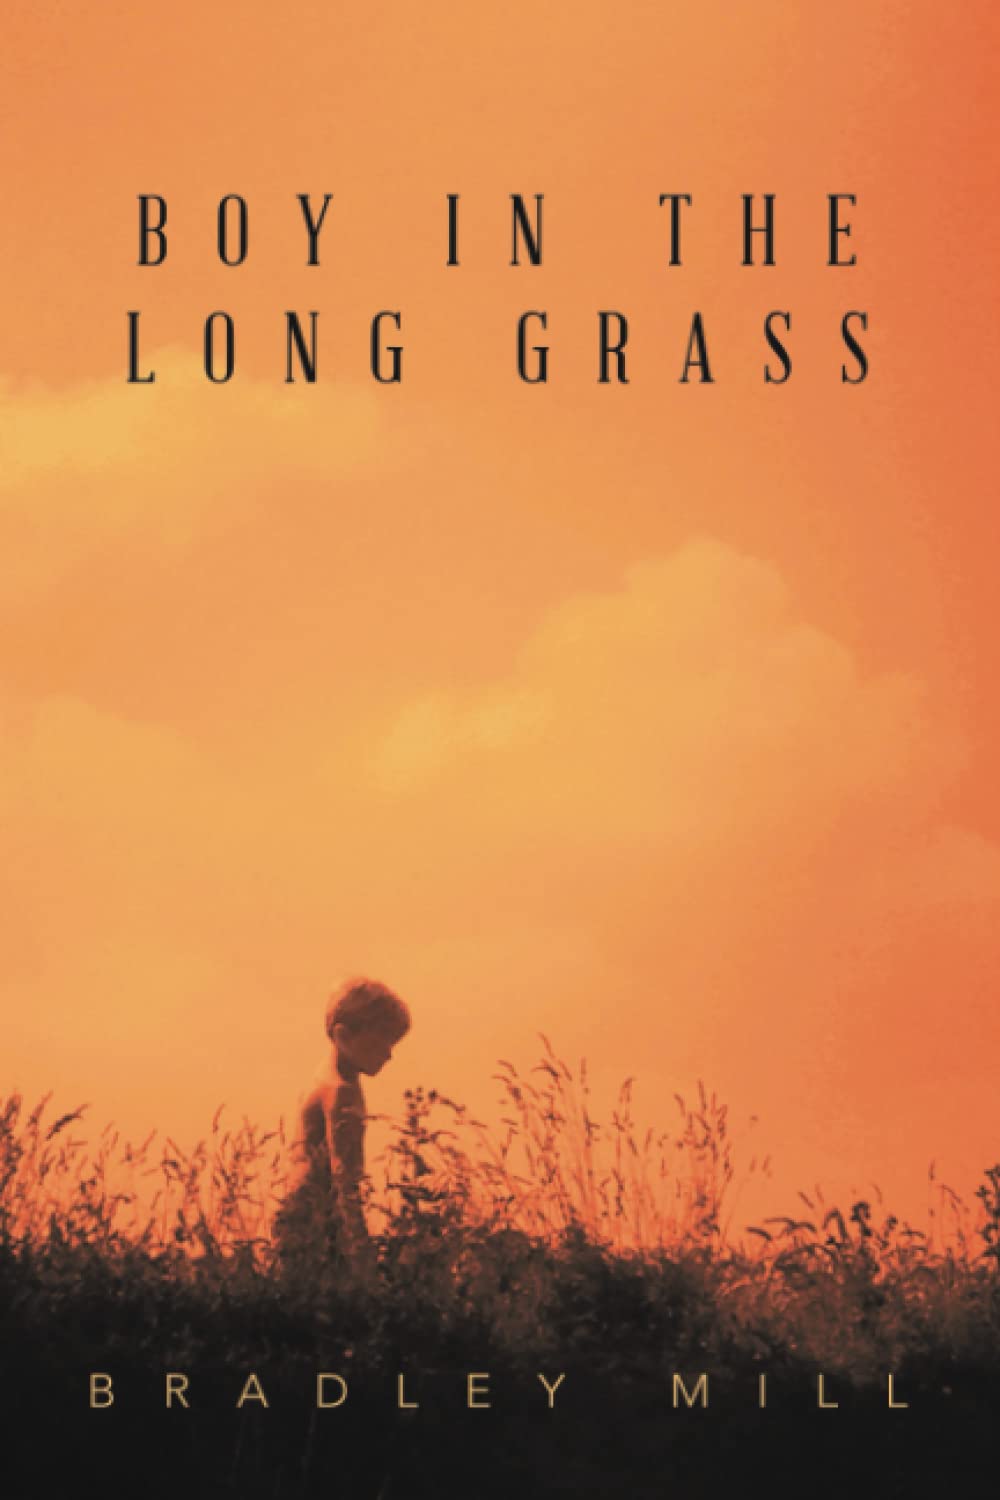 Book cover of 'Boy in the Long Grass'